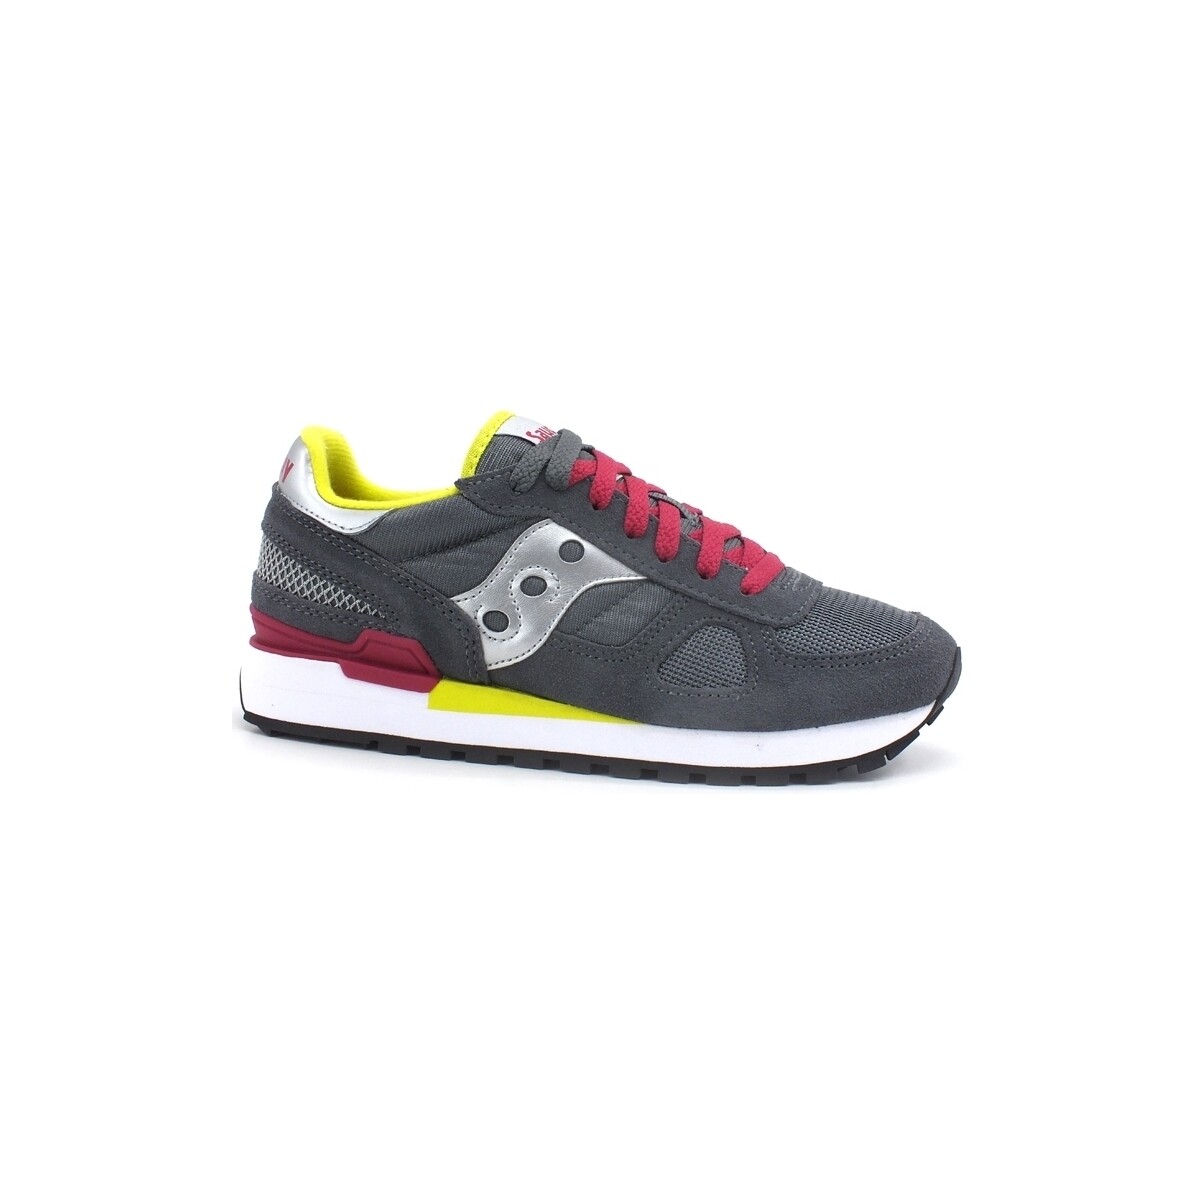 Chaussures Femme Bottes Saucony Shadow W Sneaker Grey Silver Red S1108-779 Gris